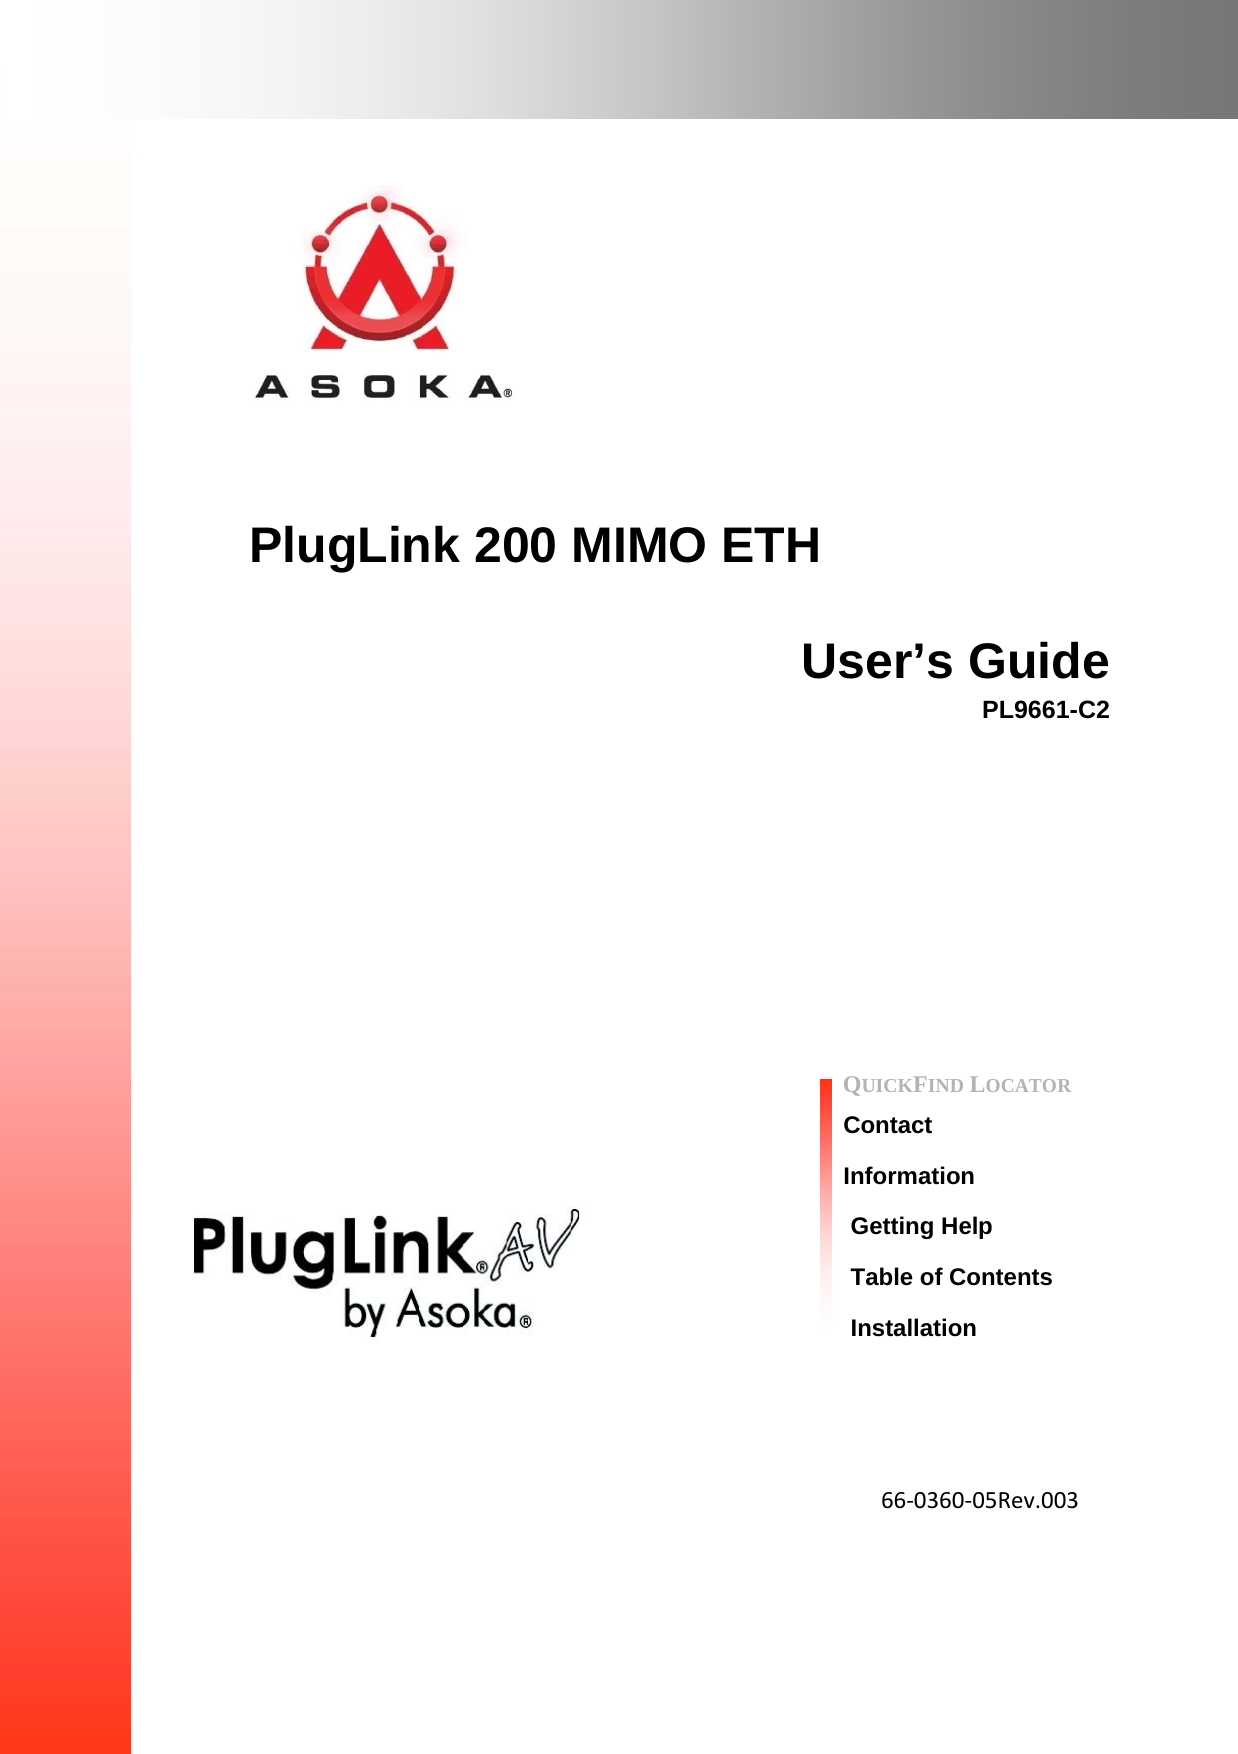         PlugLink 200 MIMO ETH  User’s Guide PL9661-C2                  QUICKFIND LOCATOR  Contact  Information Getting Help Table of Contents Installation        66‐0360‐05Rev.003